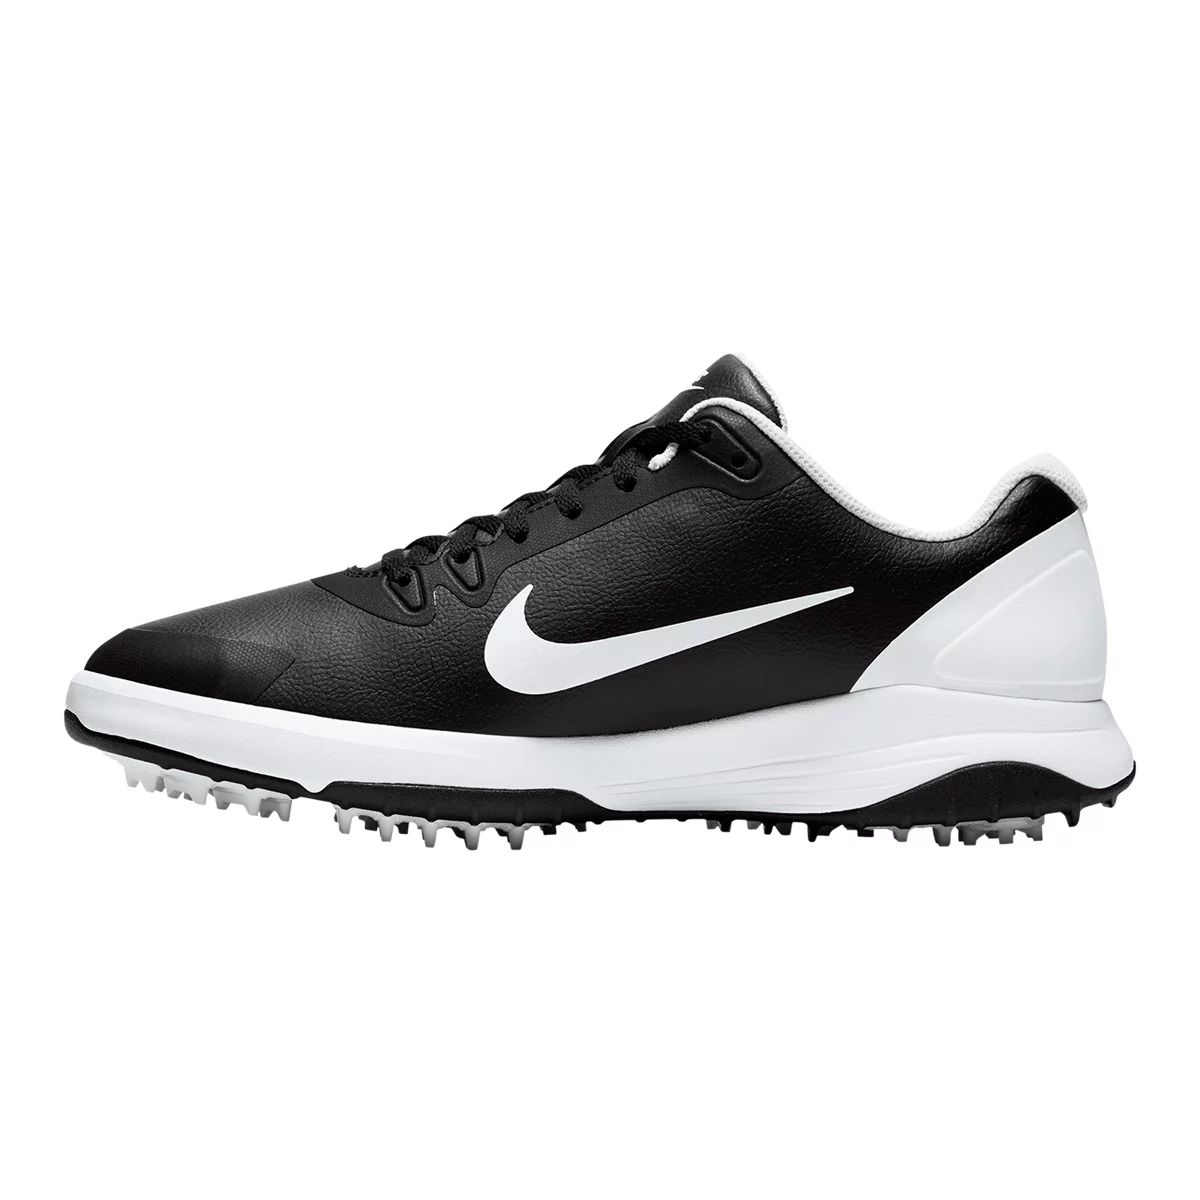 Nike Men's Infinity G Golf Shoes, Spiked, Synthetic Leather, Waterproof